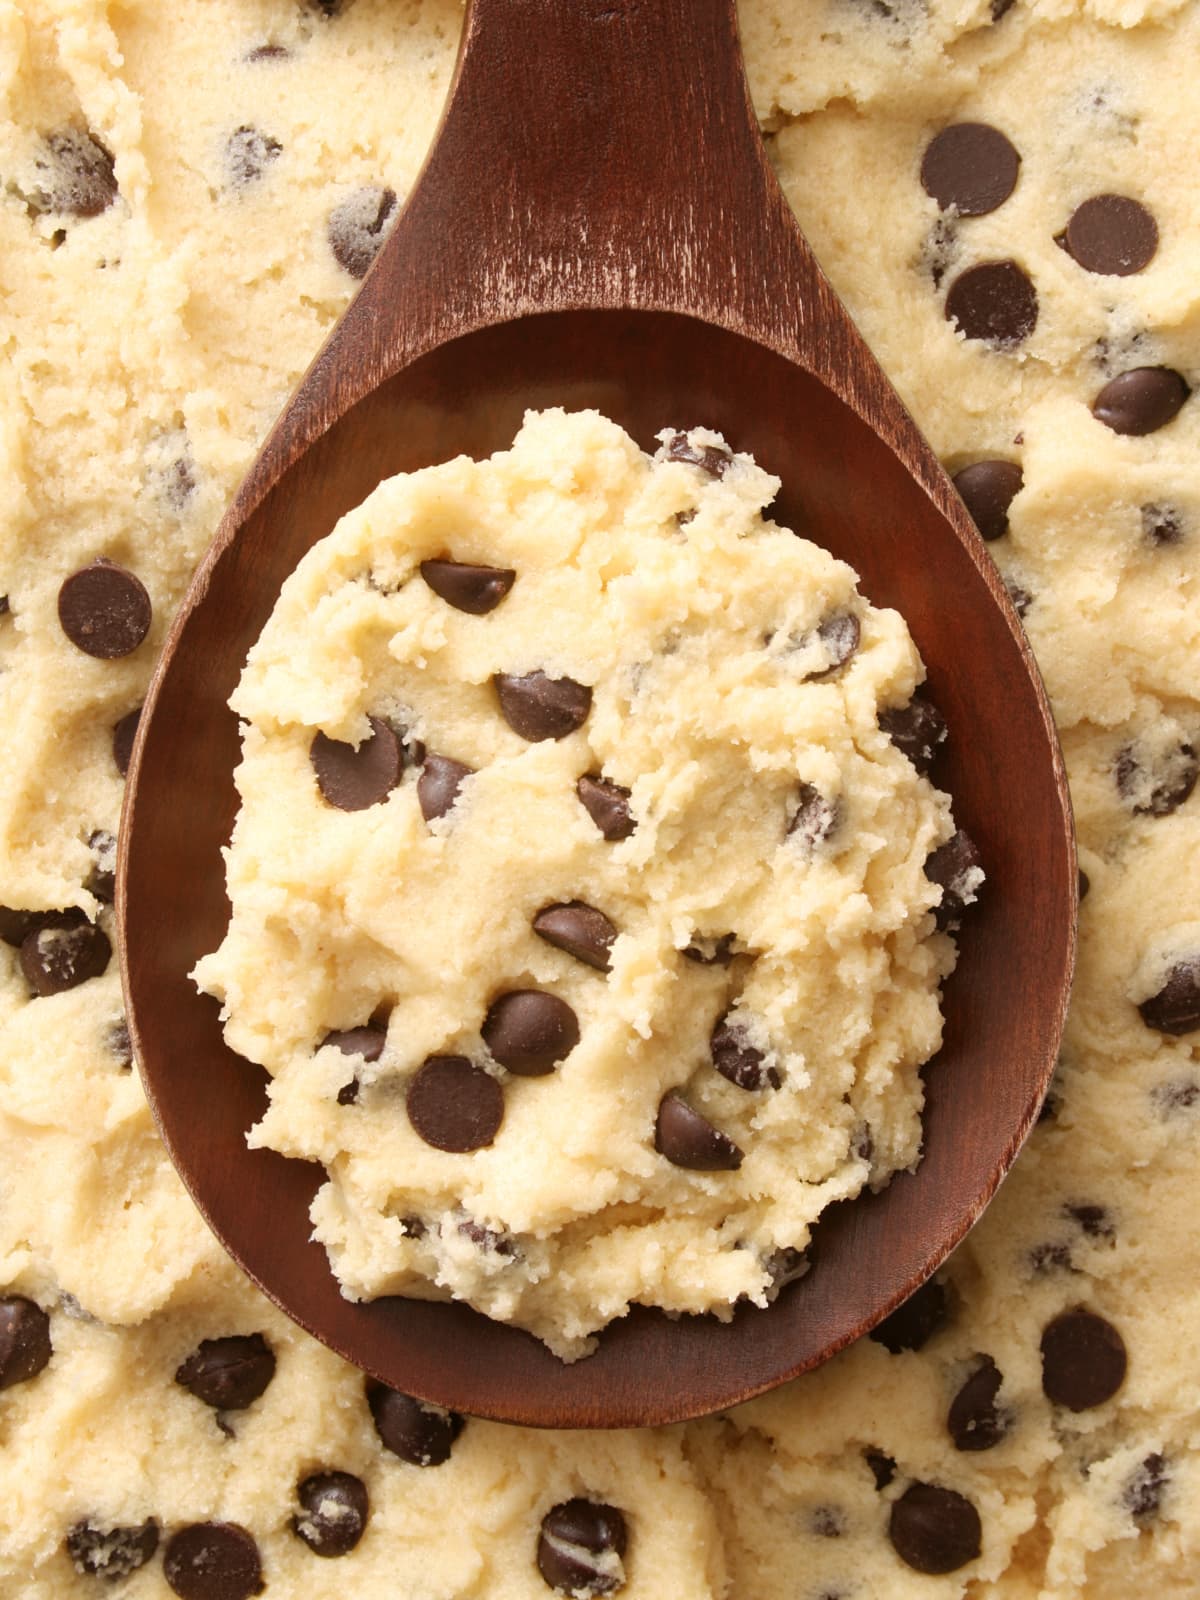 A scoop of cookie dough on a wooden spoon